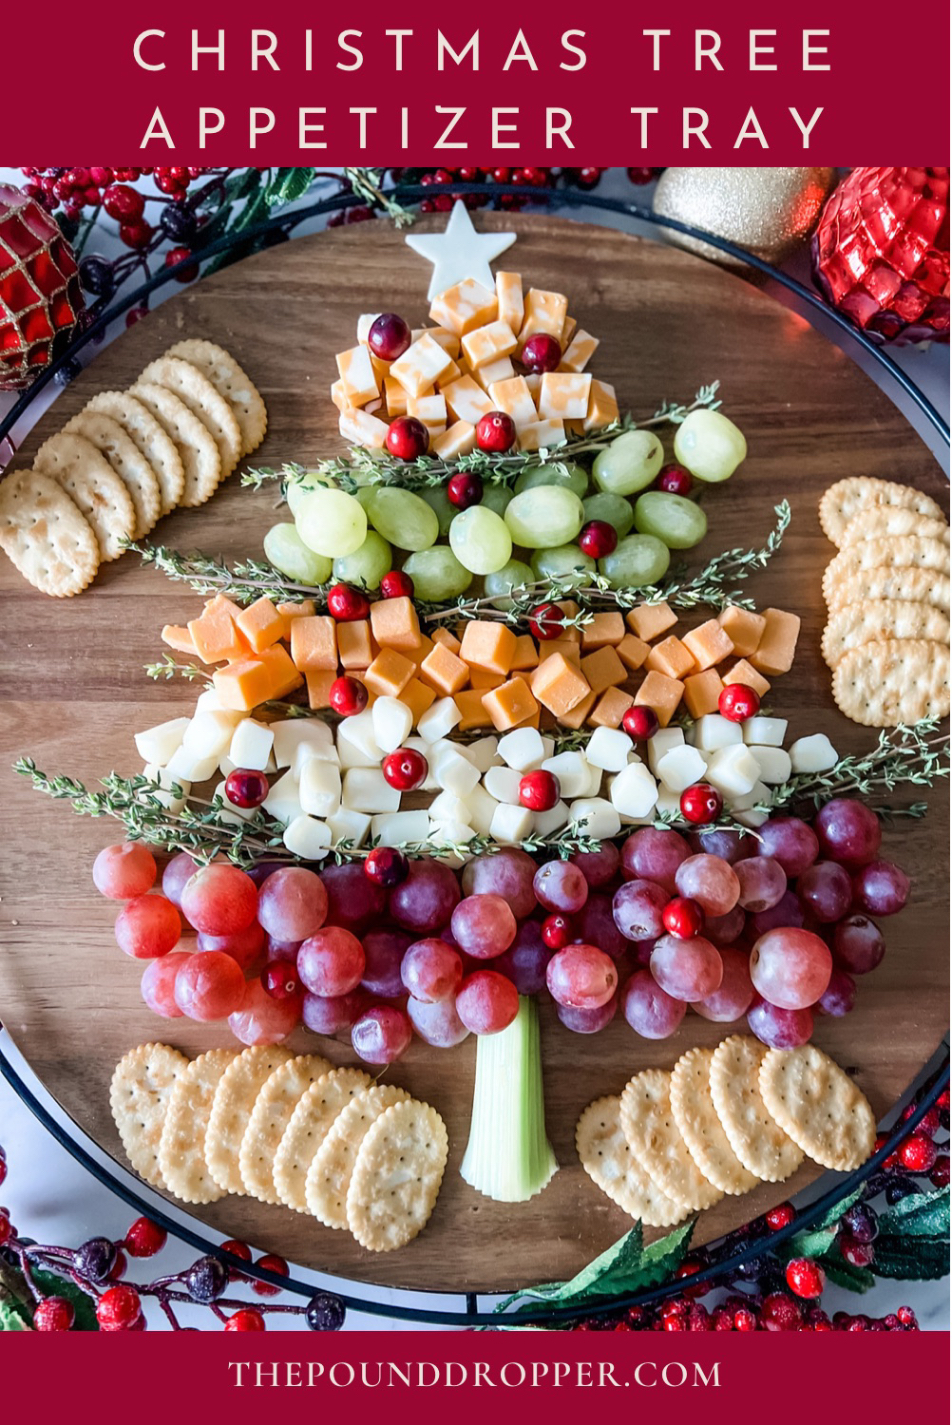 Surprise your guests with this beautiful Christmas Tree Appetizer Tray this holiday season! via @pounddropper